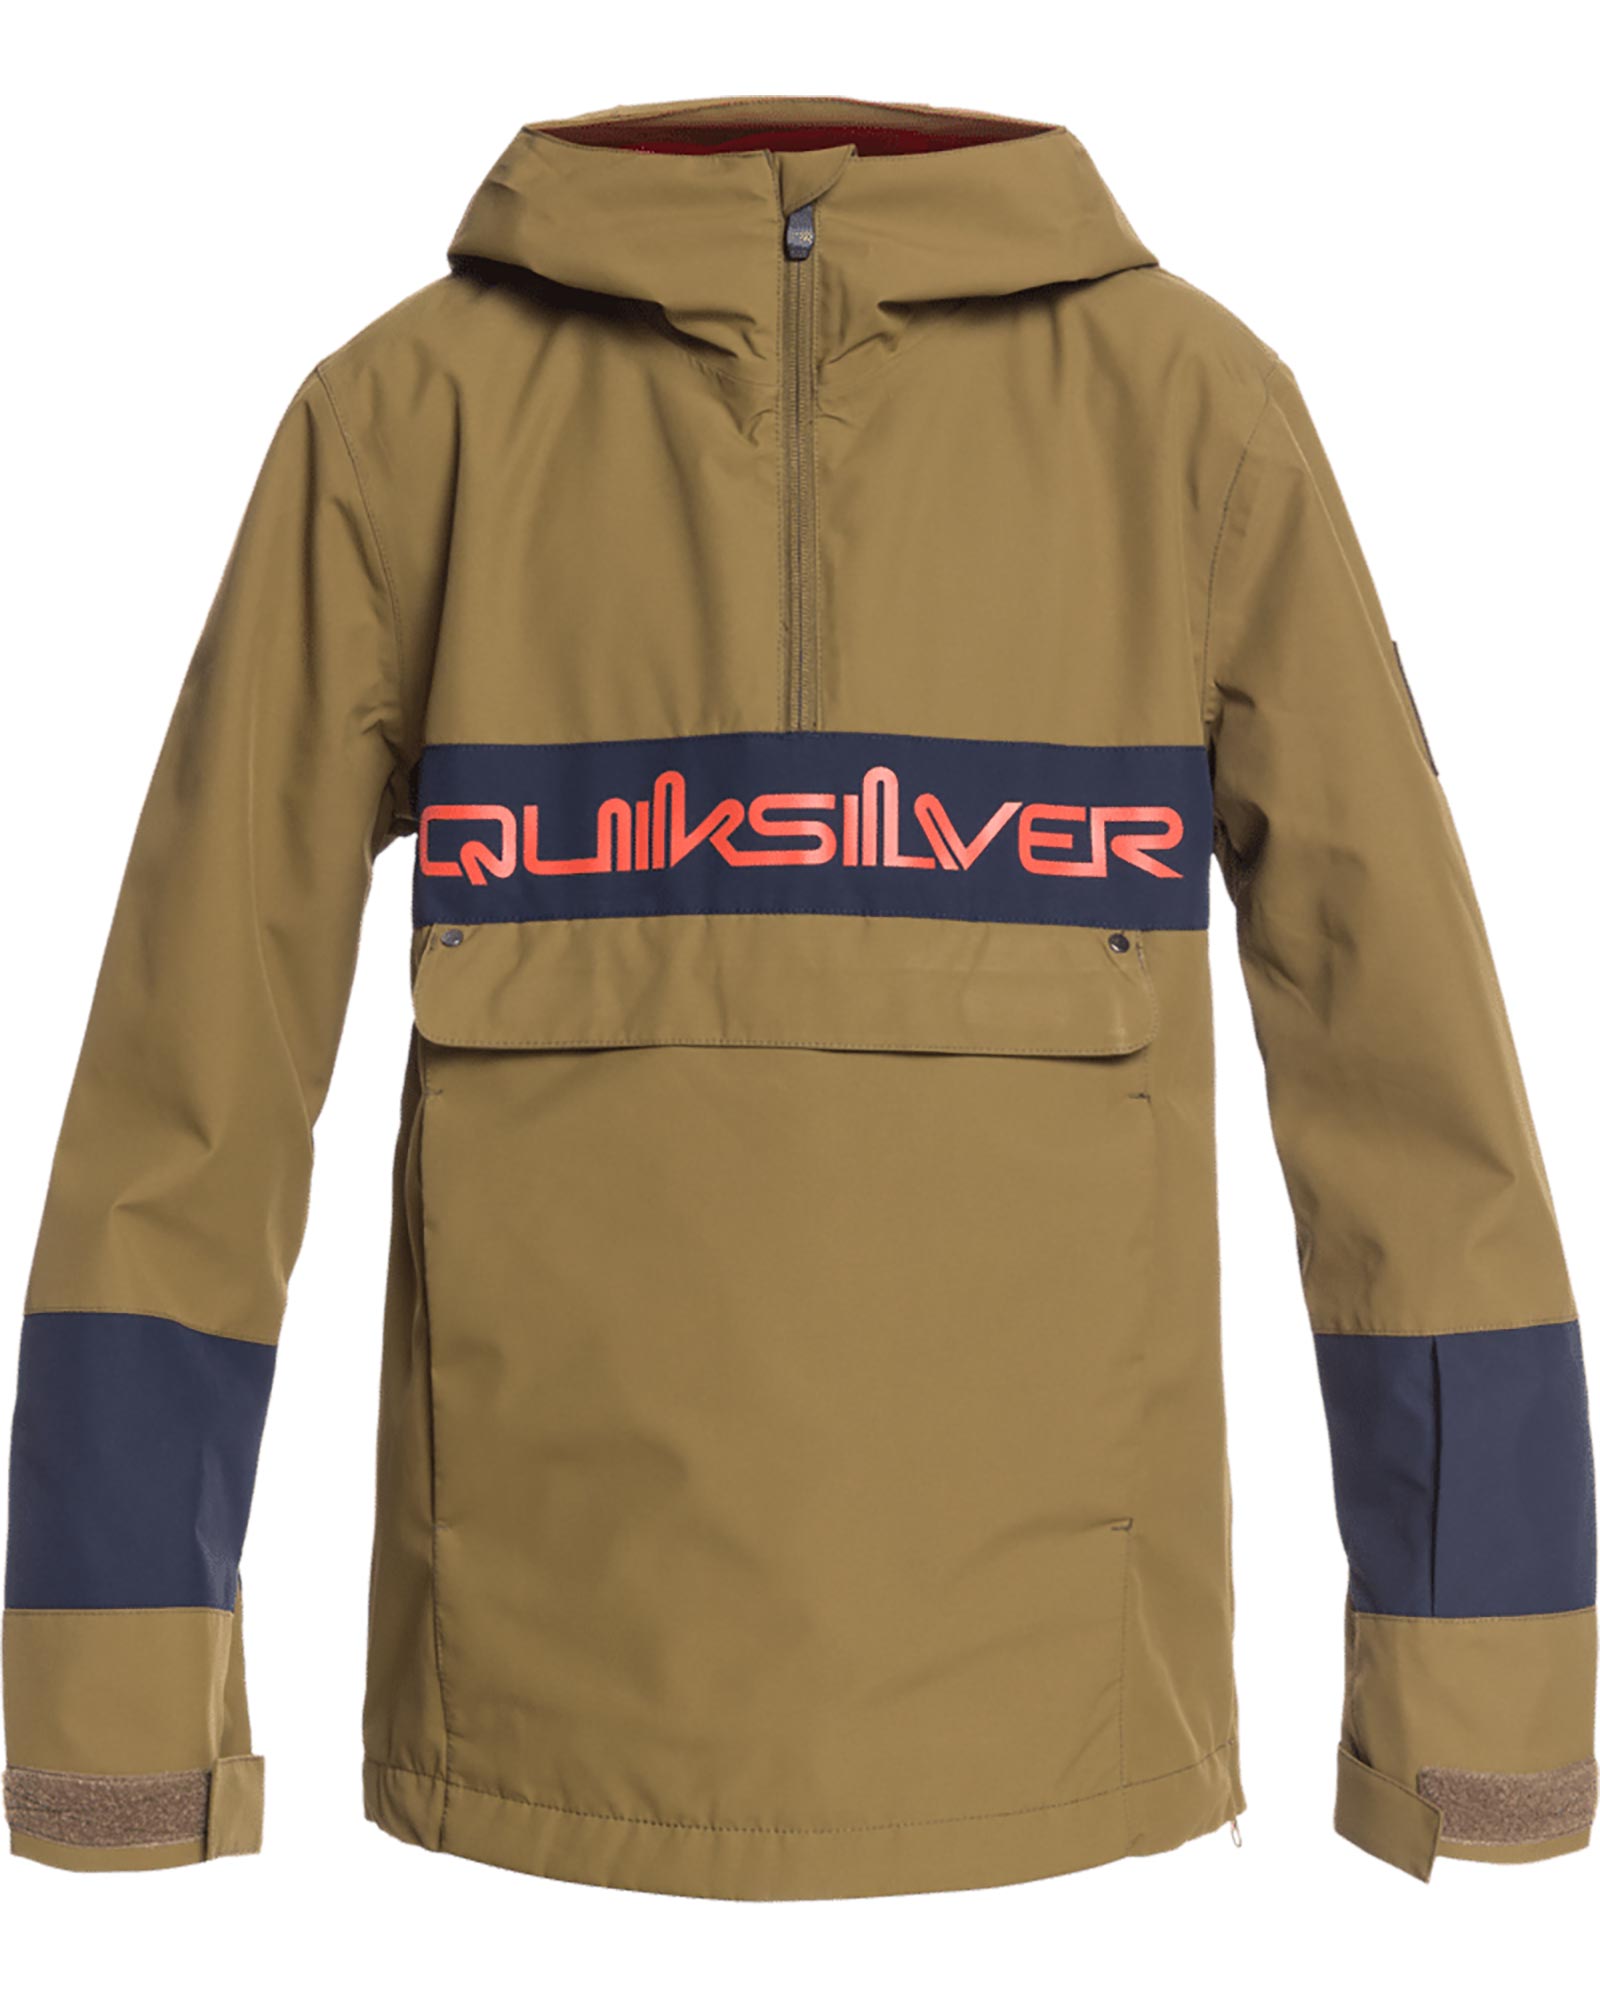 Quiksilver Steeze Boys’ Jacket - Military Olive 10 Years